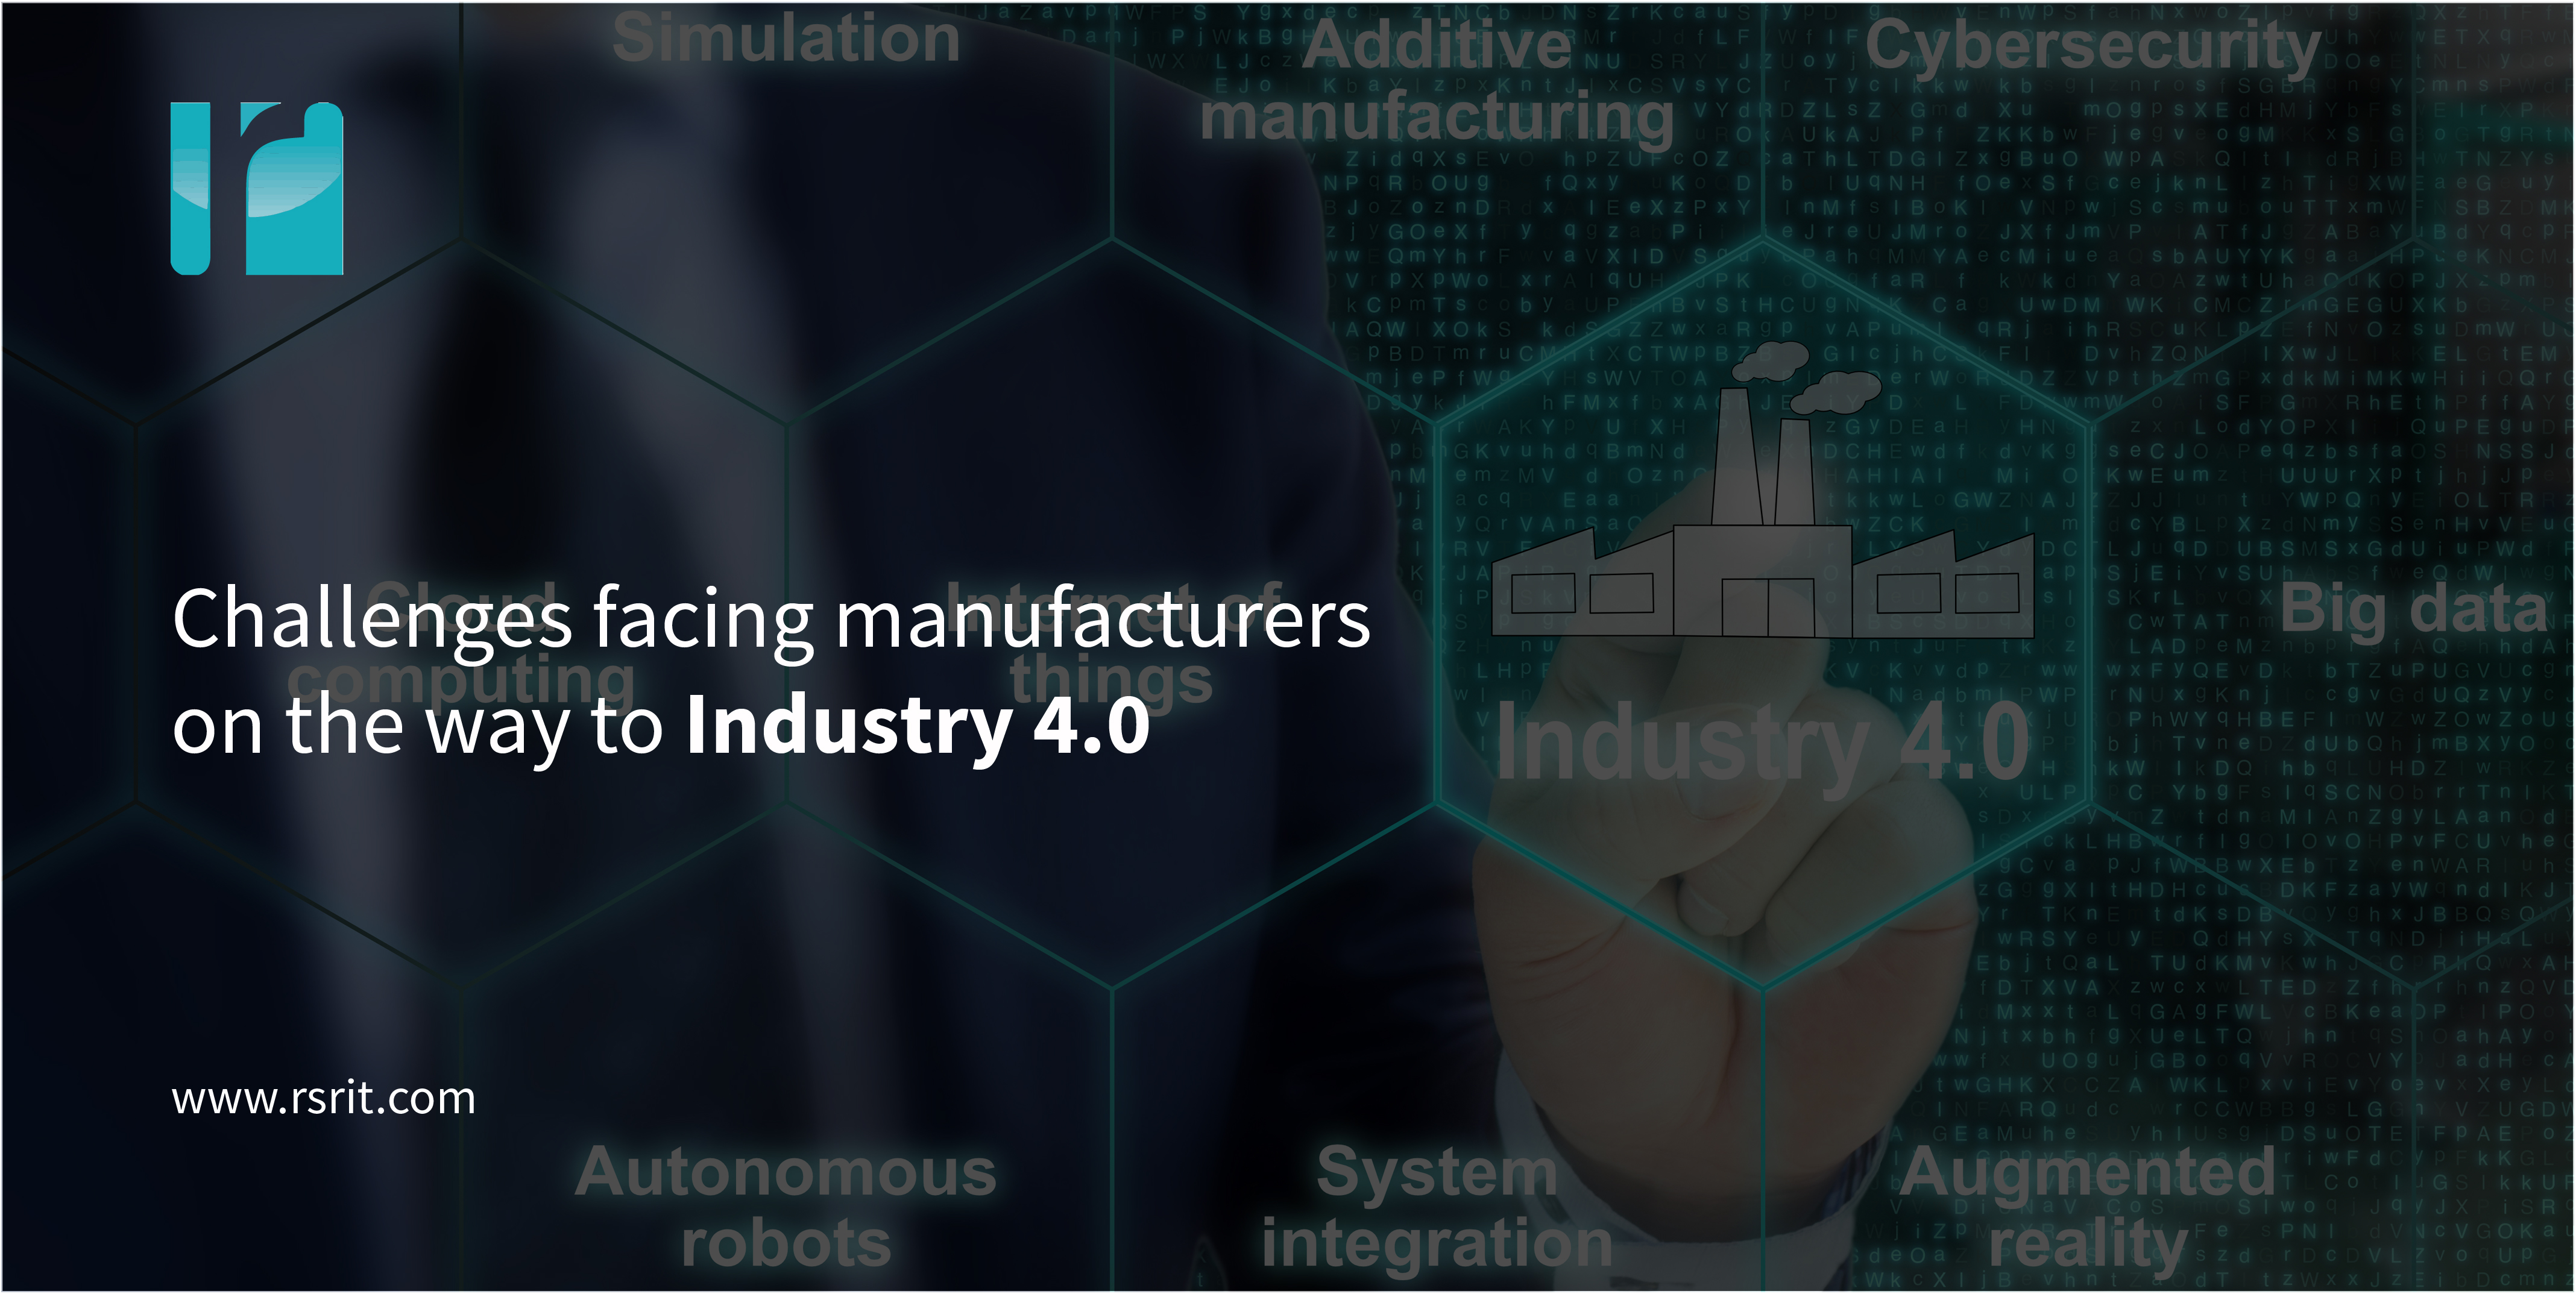 Challenges facing manufacturers on the way to Industry 4.0